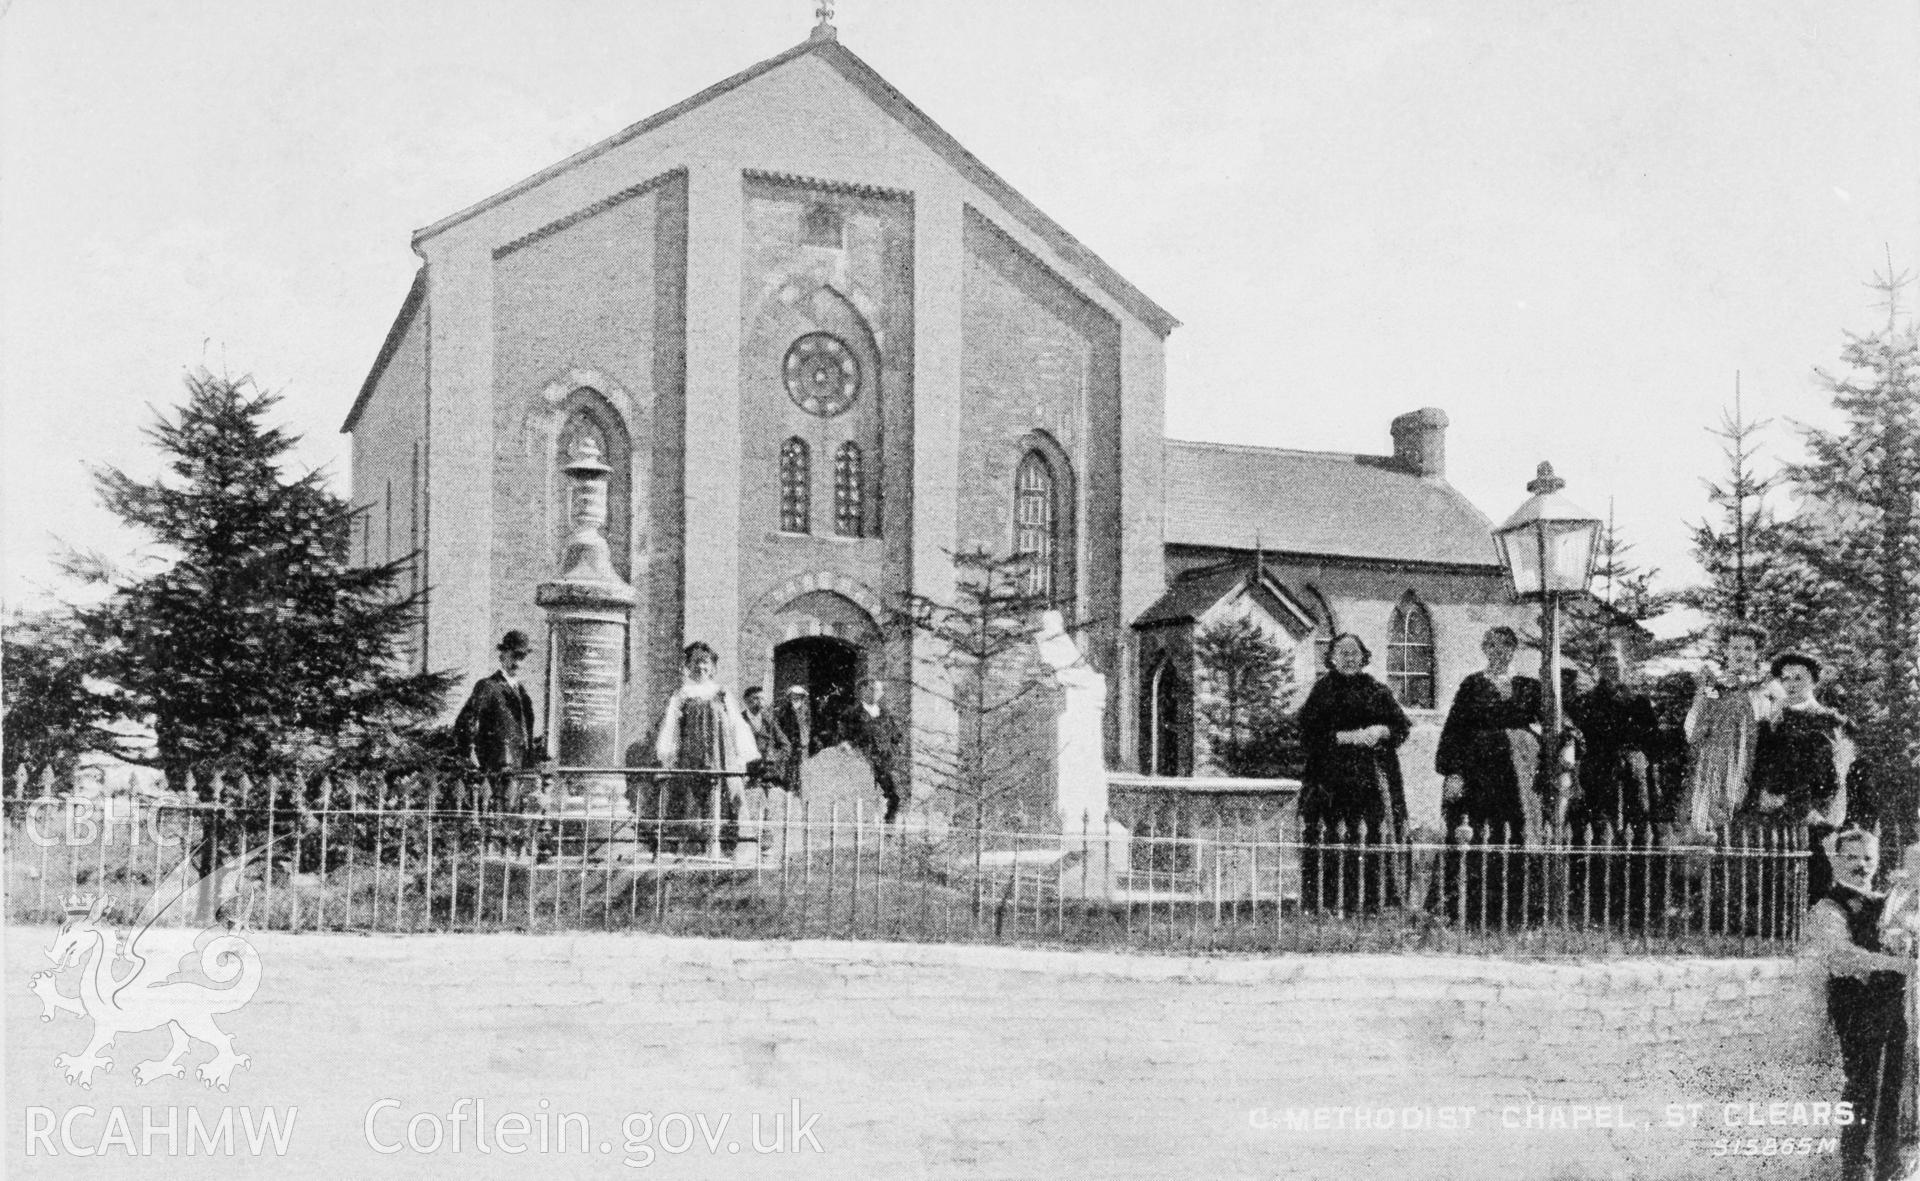 Trinity Chapel, St Clears; B&W photo copied from an c.1900 postcard loaned for copying by Thomas Lloyd. Copy negative held.